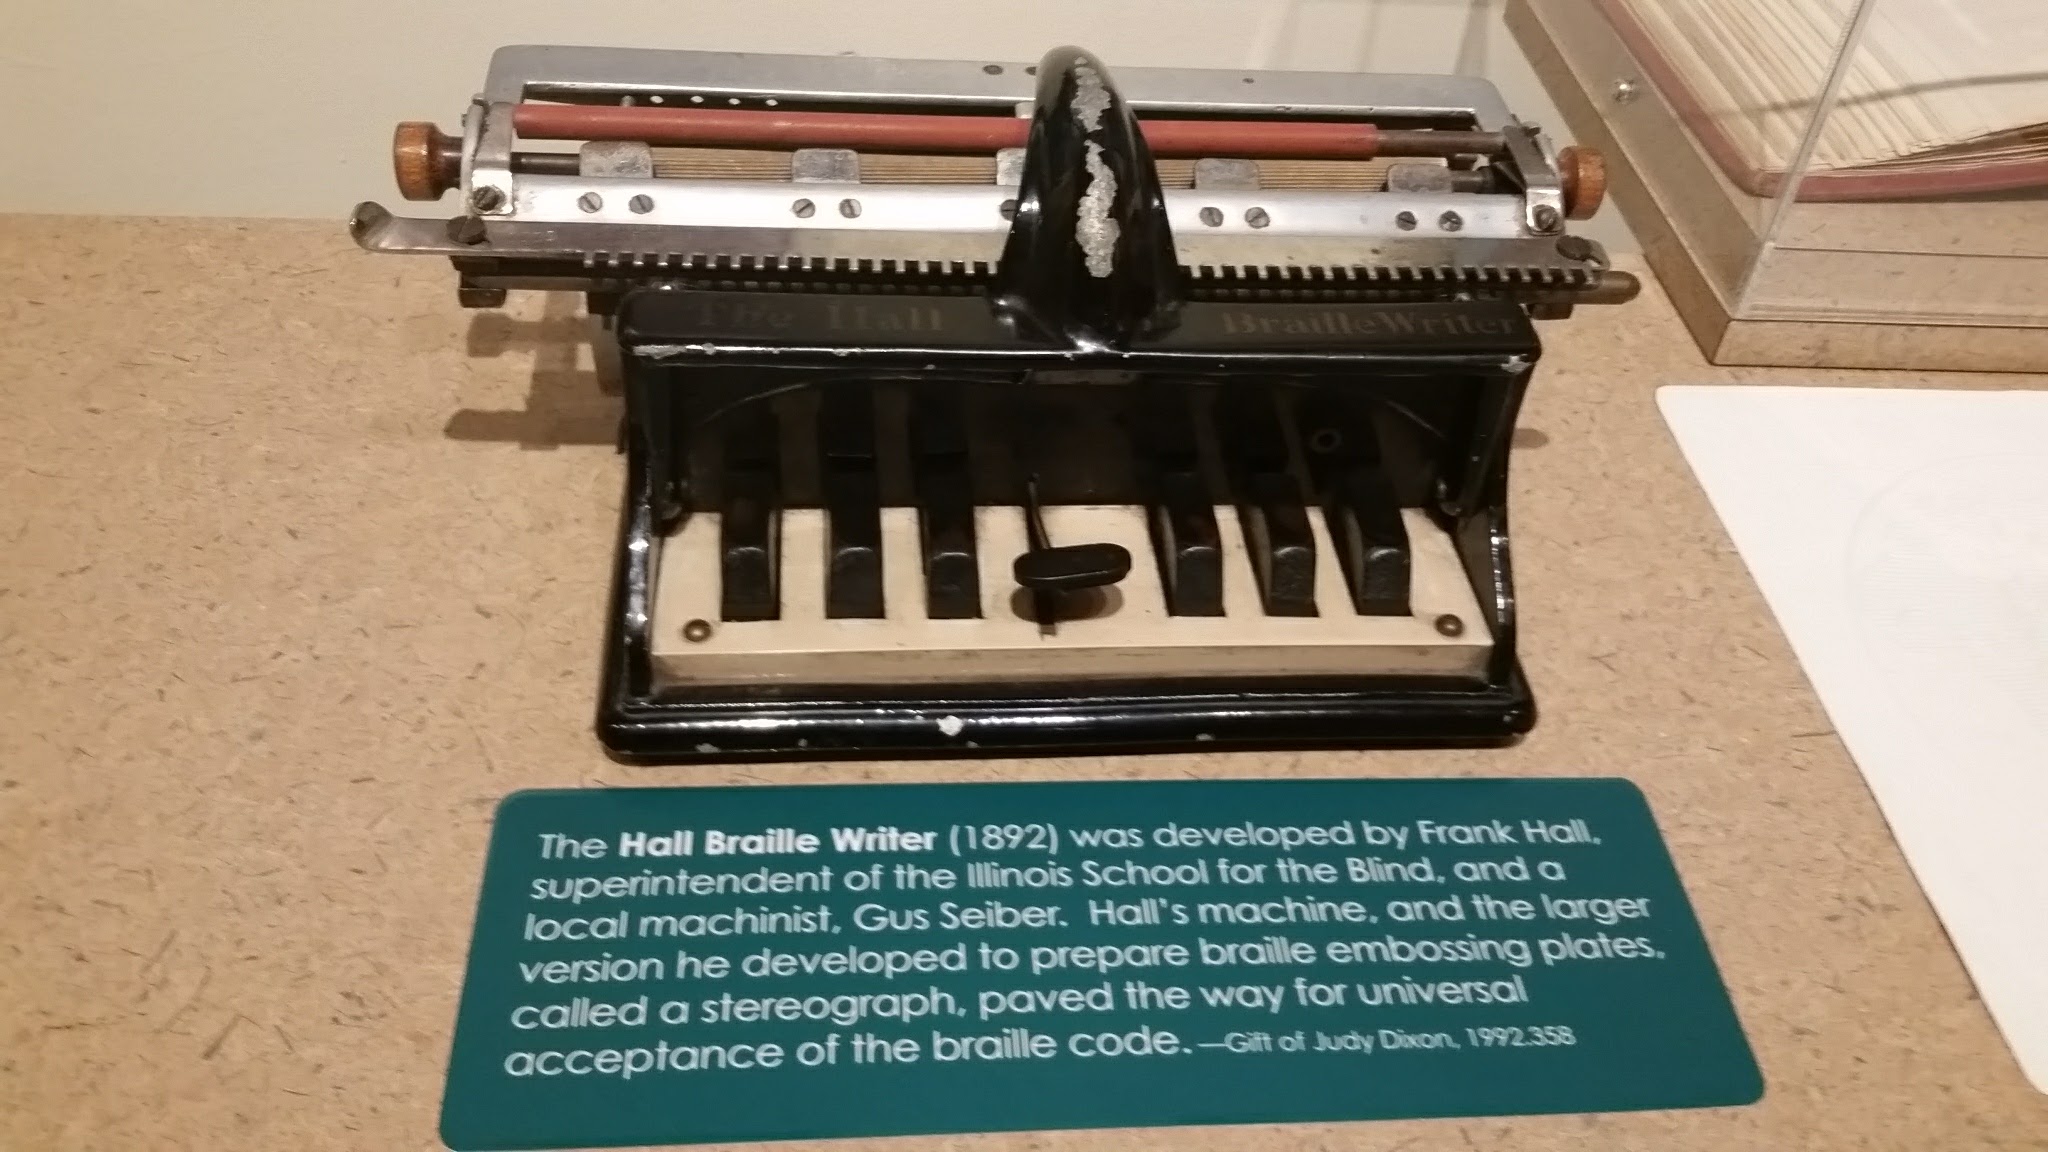 One of the many early Braille writers.